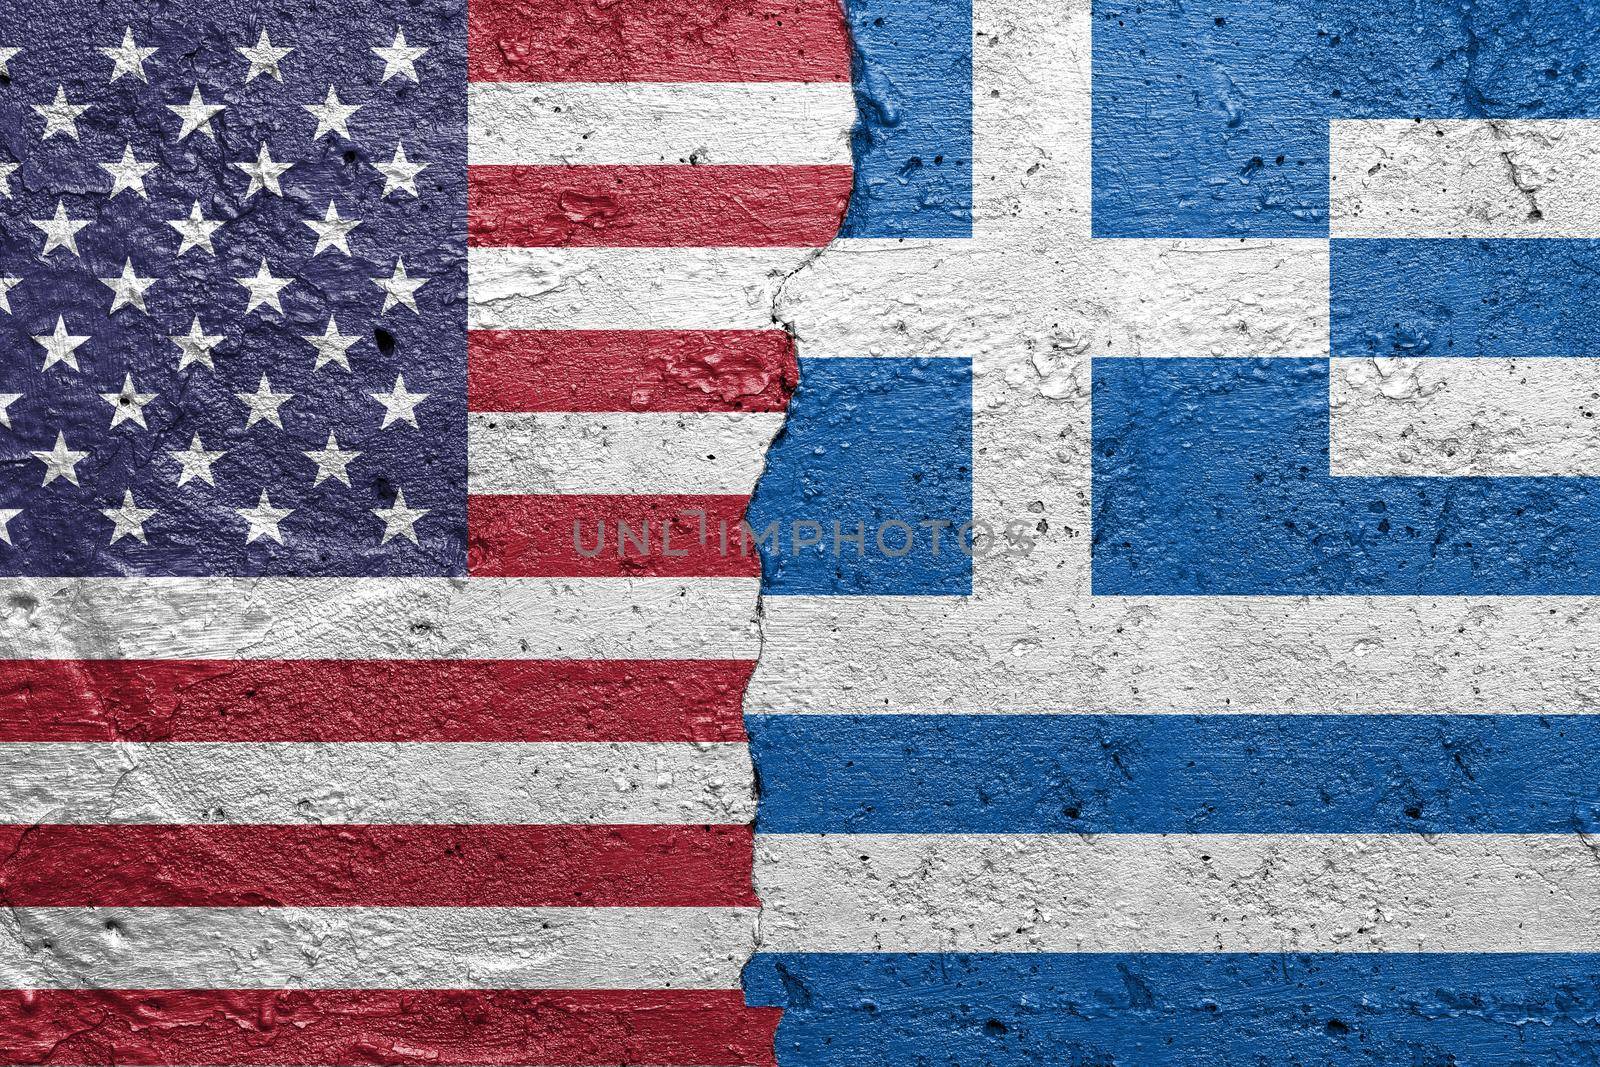 United States of America and Greece - Cracked concrete wall painted with a USA flag on the left and a Greek flag on the right stock photo by adamr